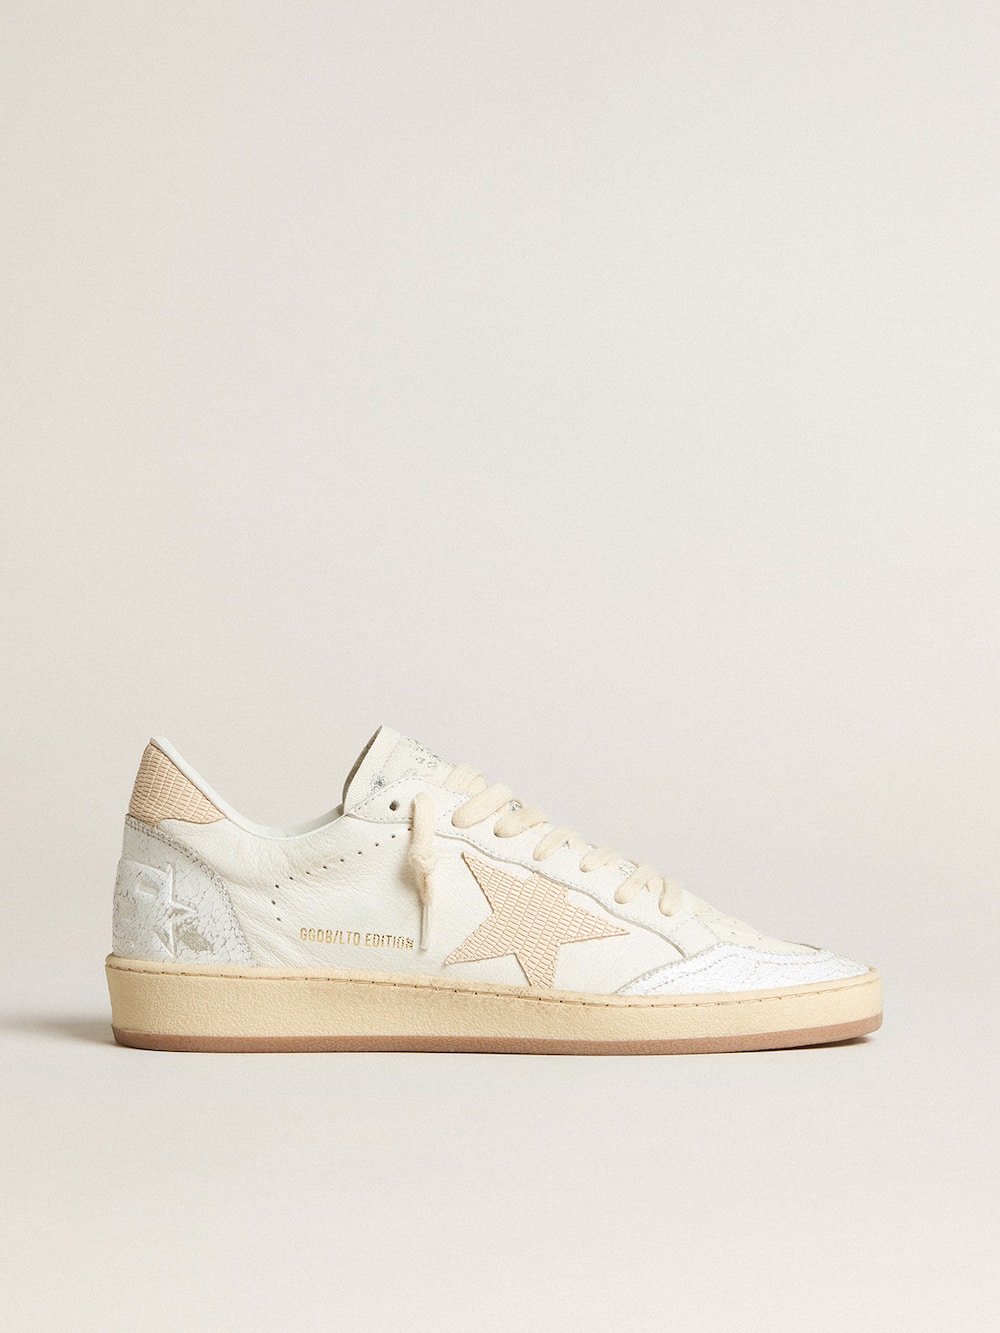 Golden Goose - Women’s Ball Star LTD CNY in white leather with ivory star in 